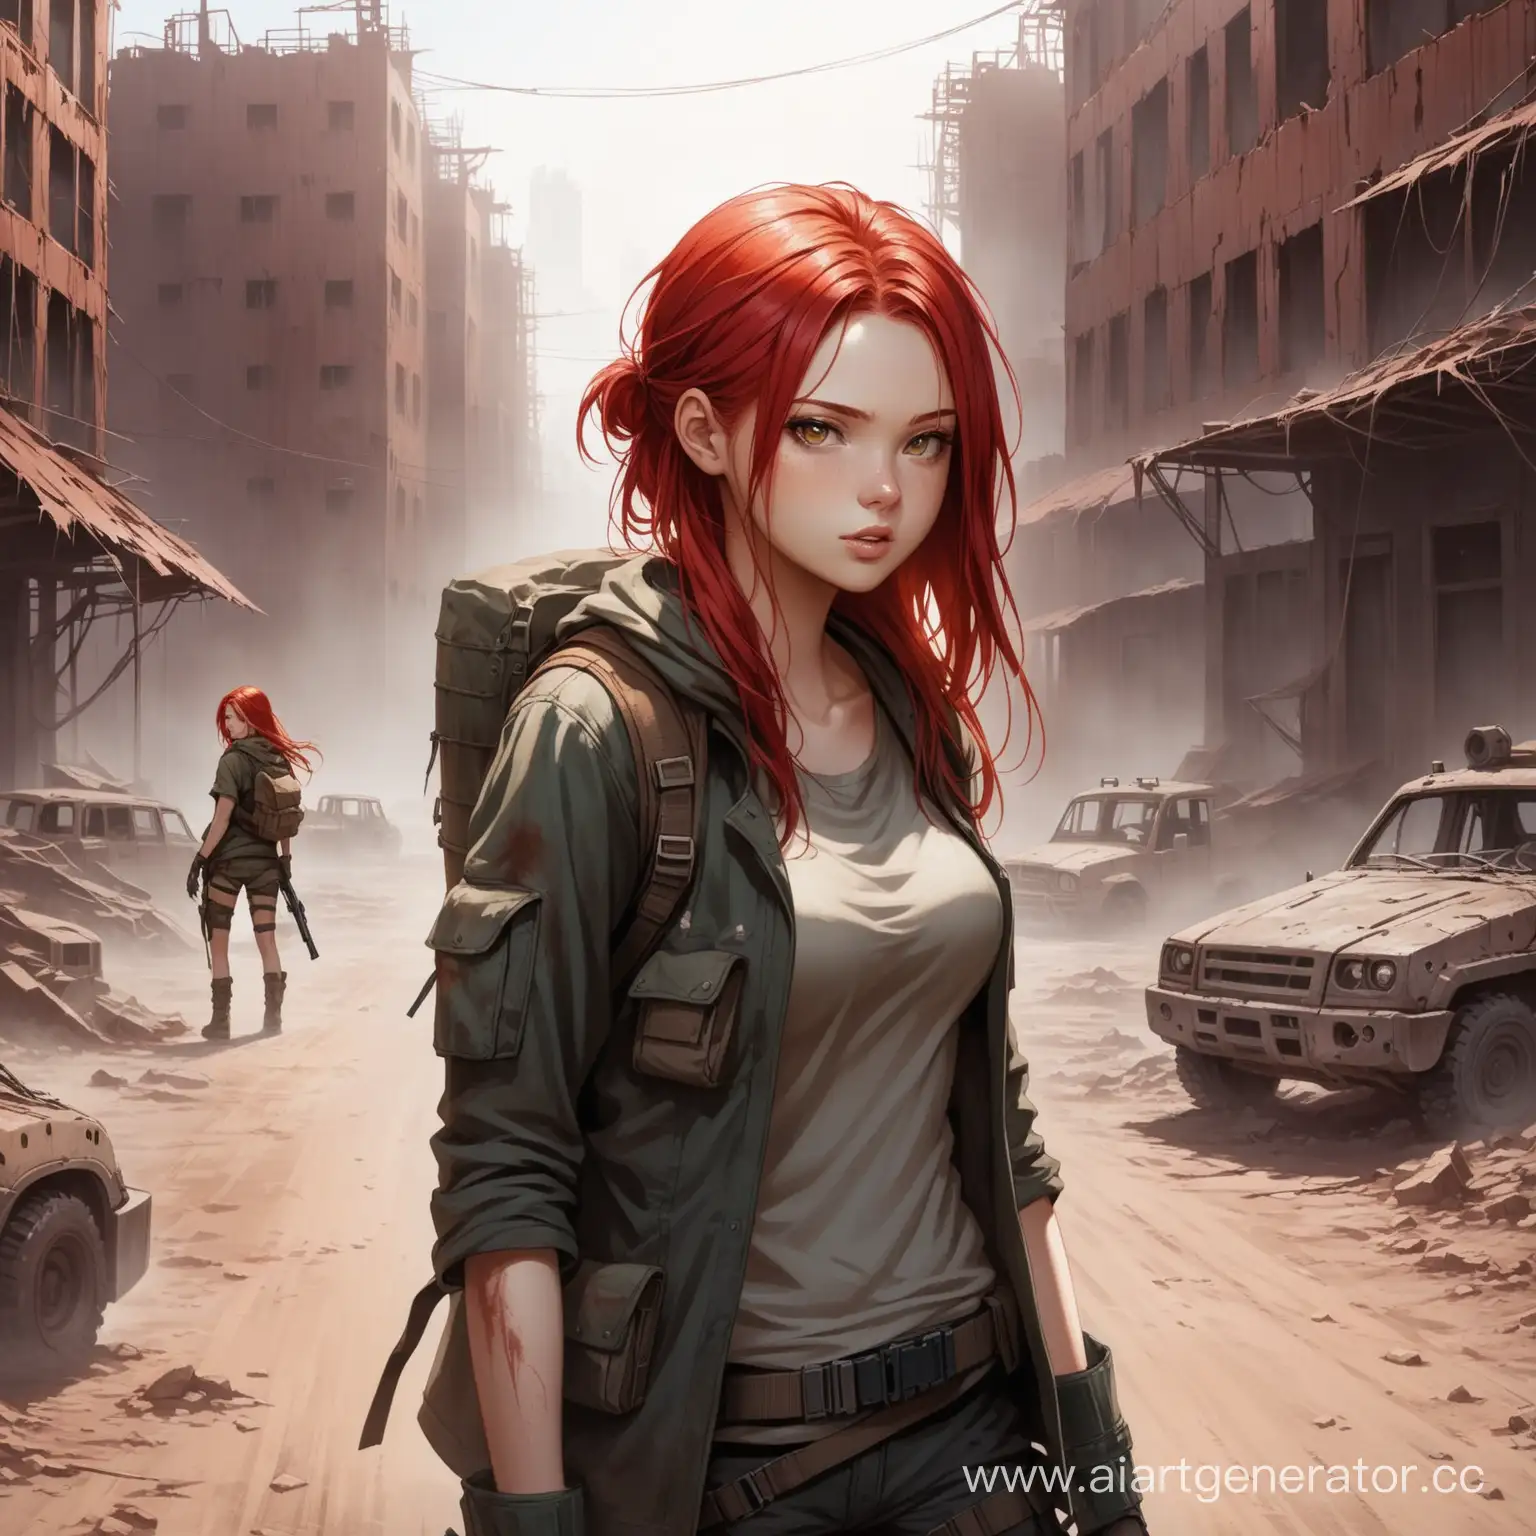 RedHaired-Girl-Surviving-in-PostApocalyptic-Landscape